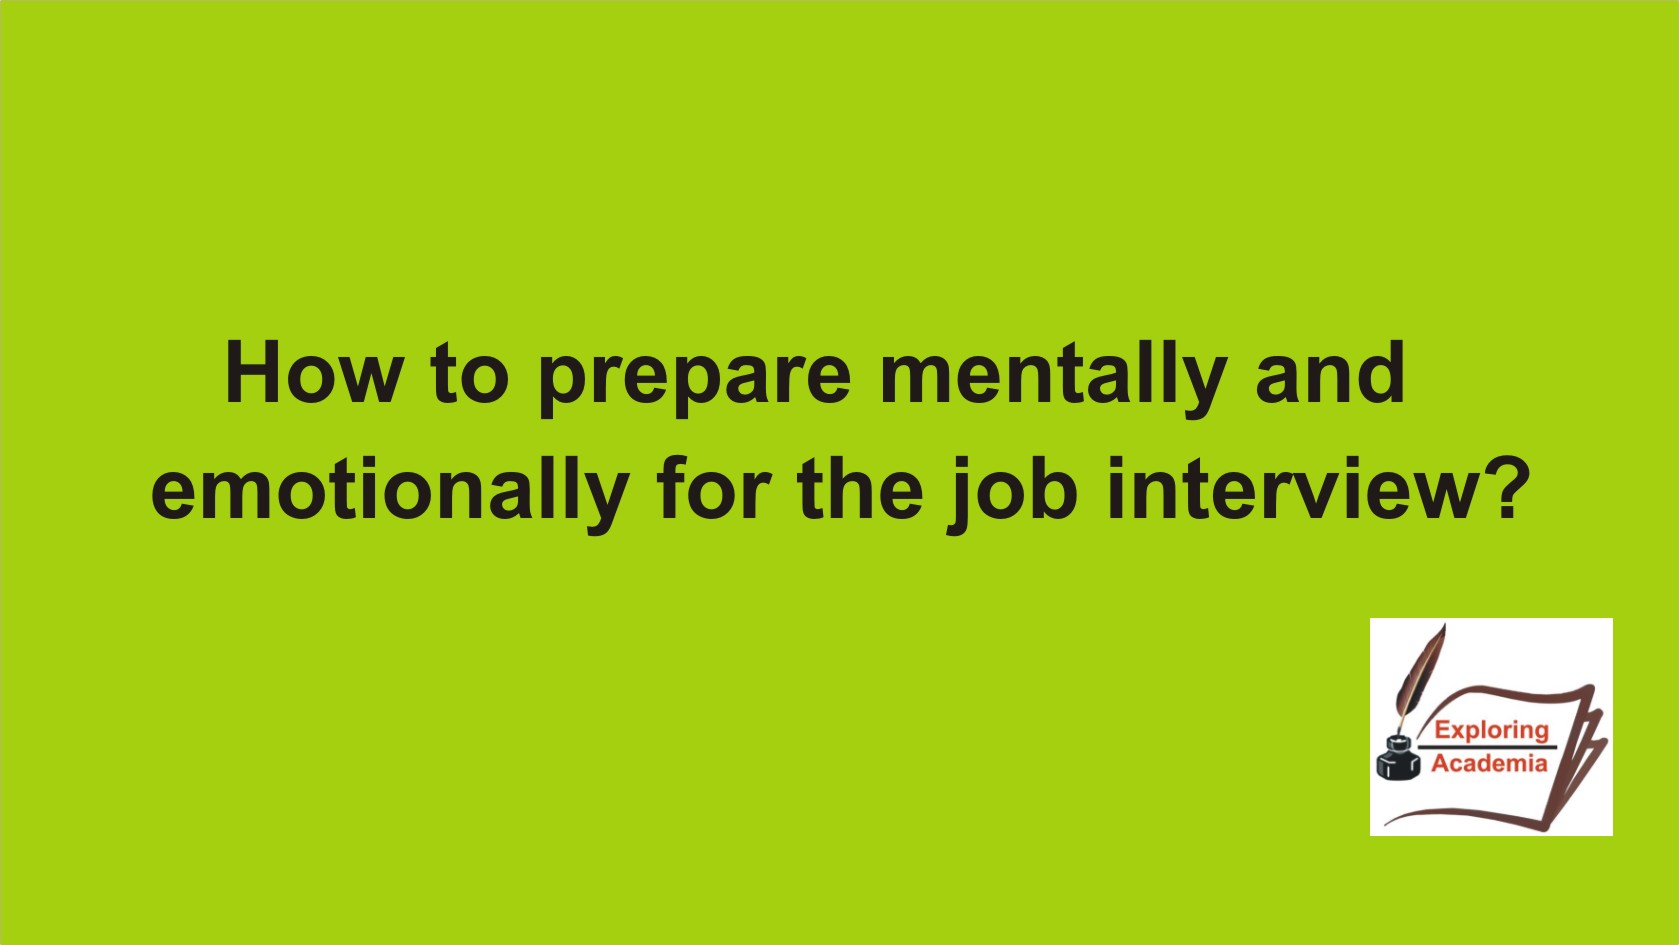 How to prepare mentally and emotionally for the job interview?